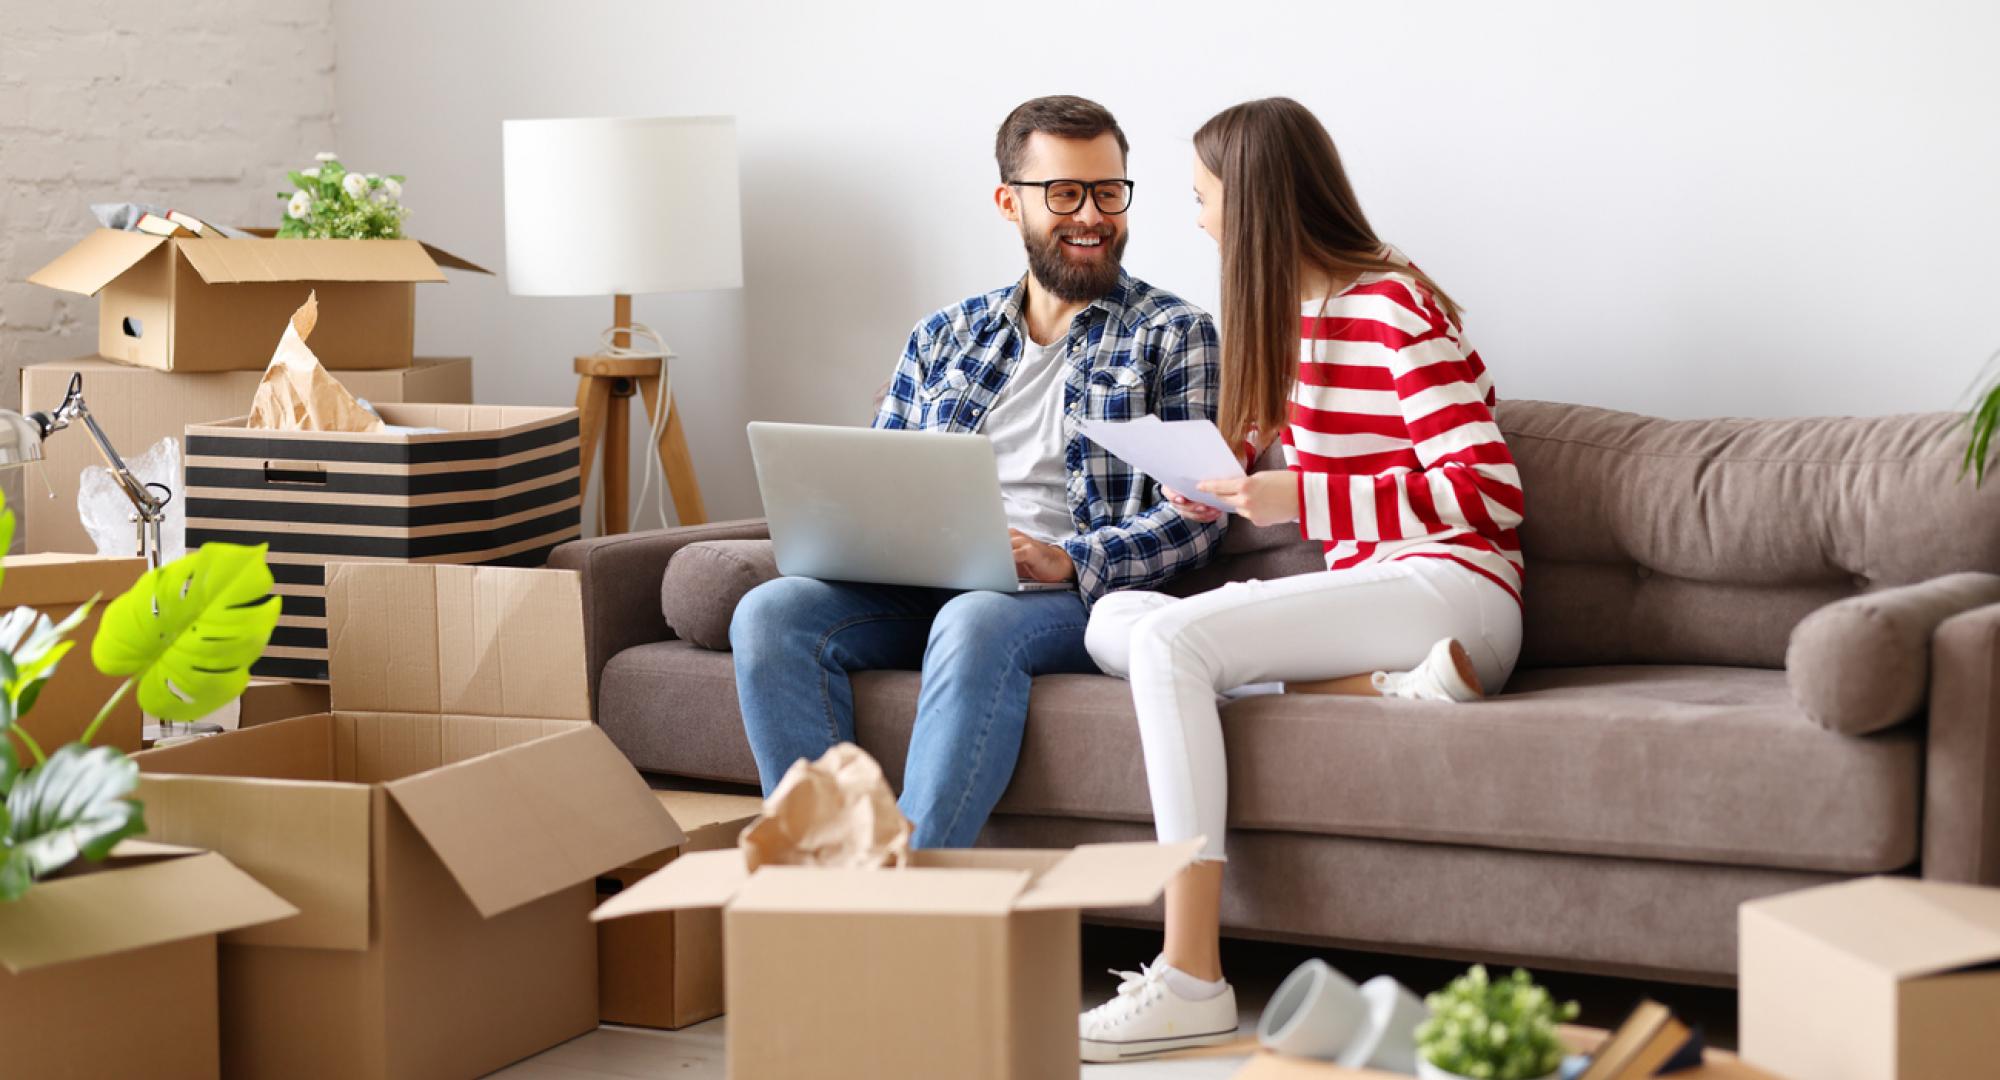 Couple in room full of boxes after moving into their first home